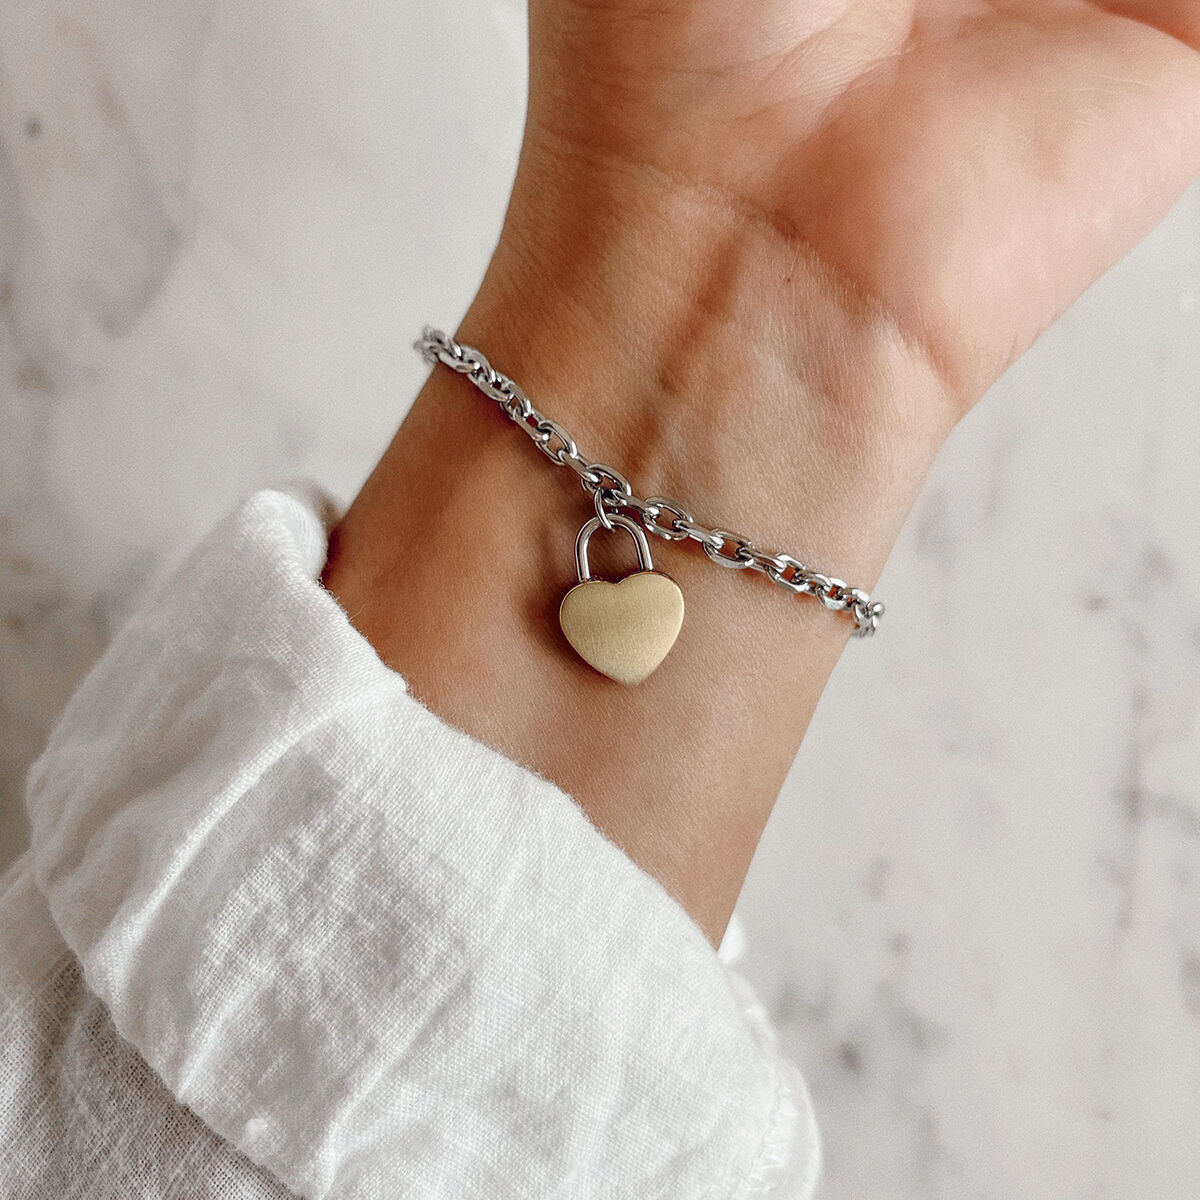 SOLD - This Victorian 9K heart lock bracelet is the perfect staple piece 🧡  | Instagram